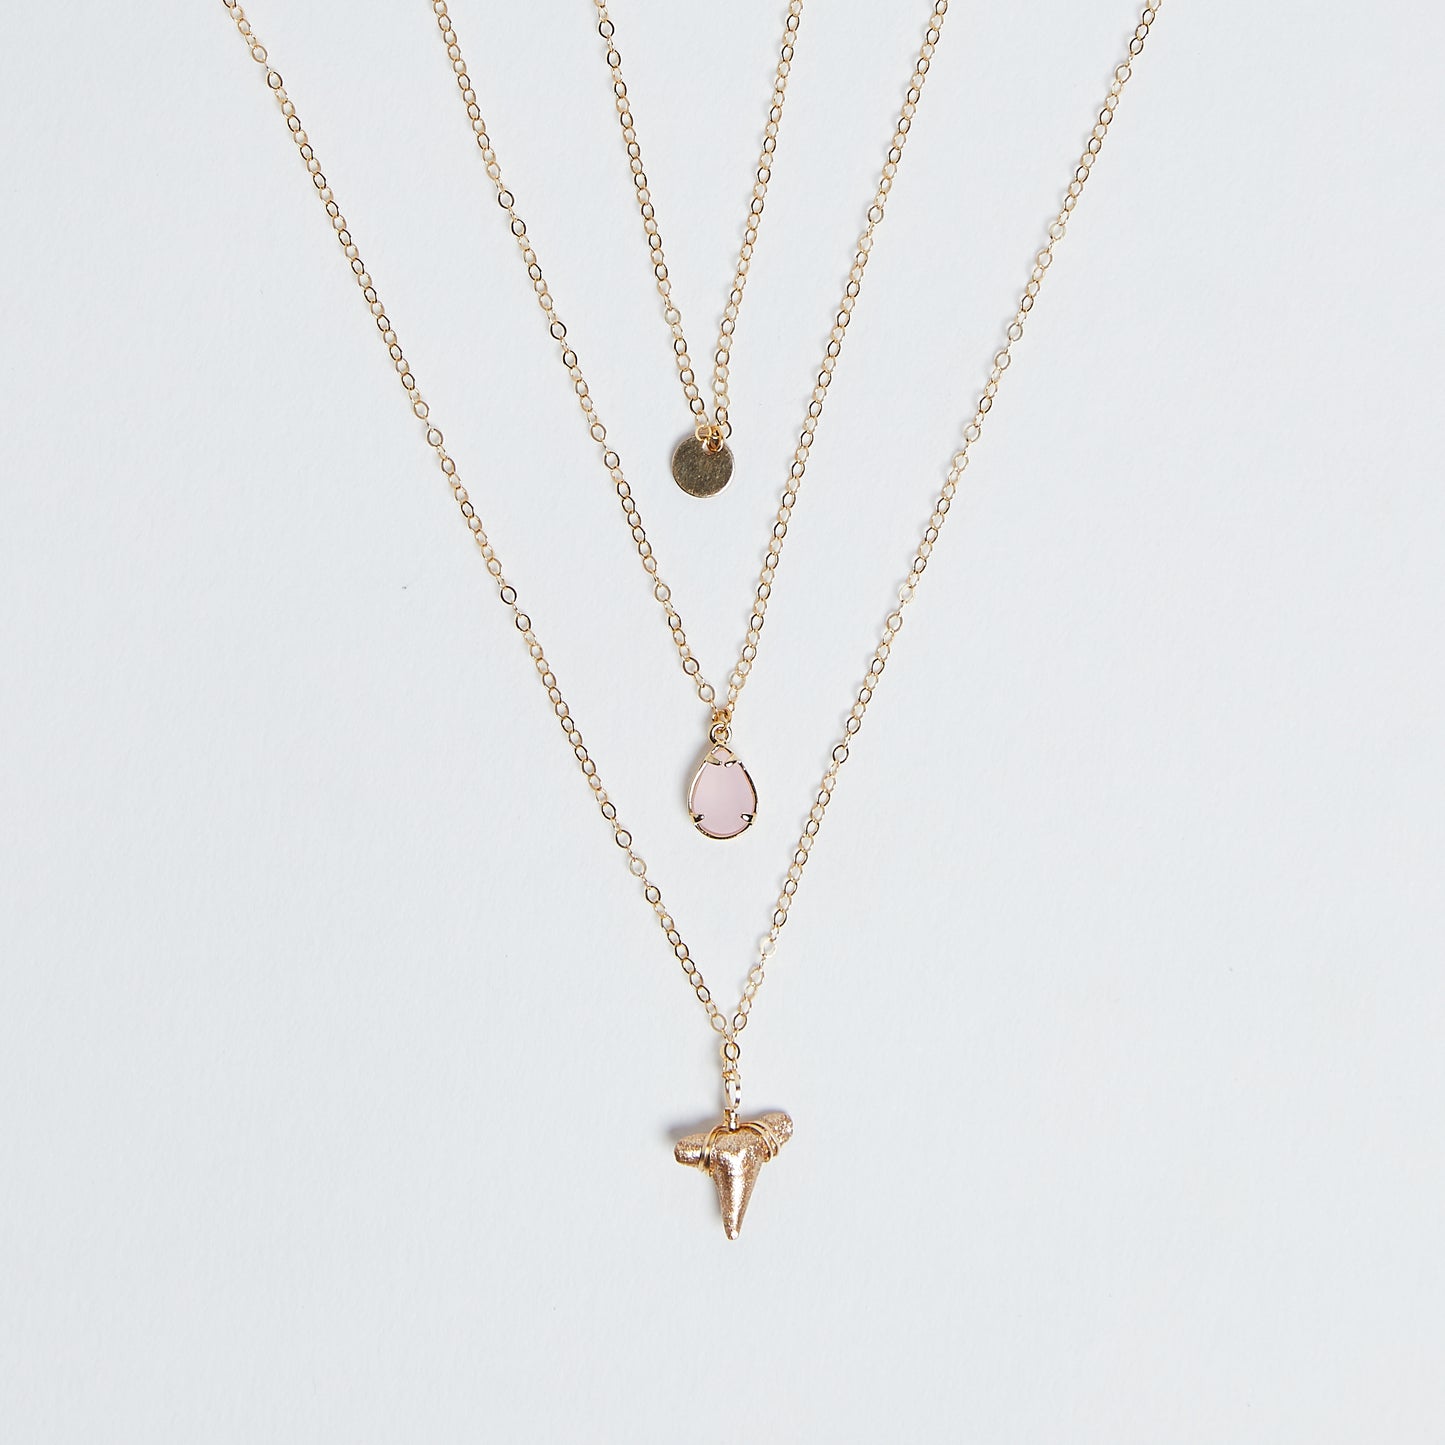 East Coast Vibes - Foxy Fossils 3 layer gold shark tooth necklace with light rose pink quartz crystal charm